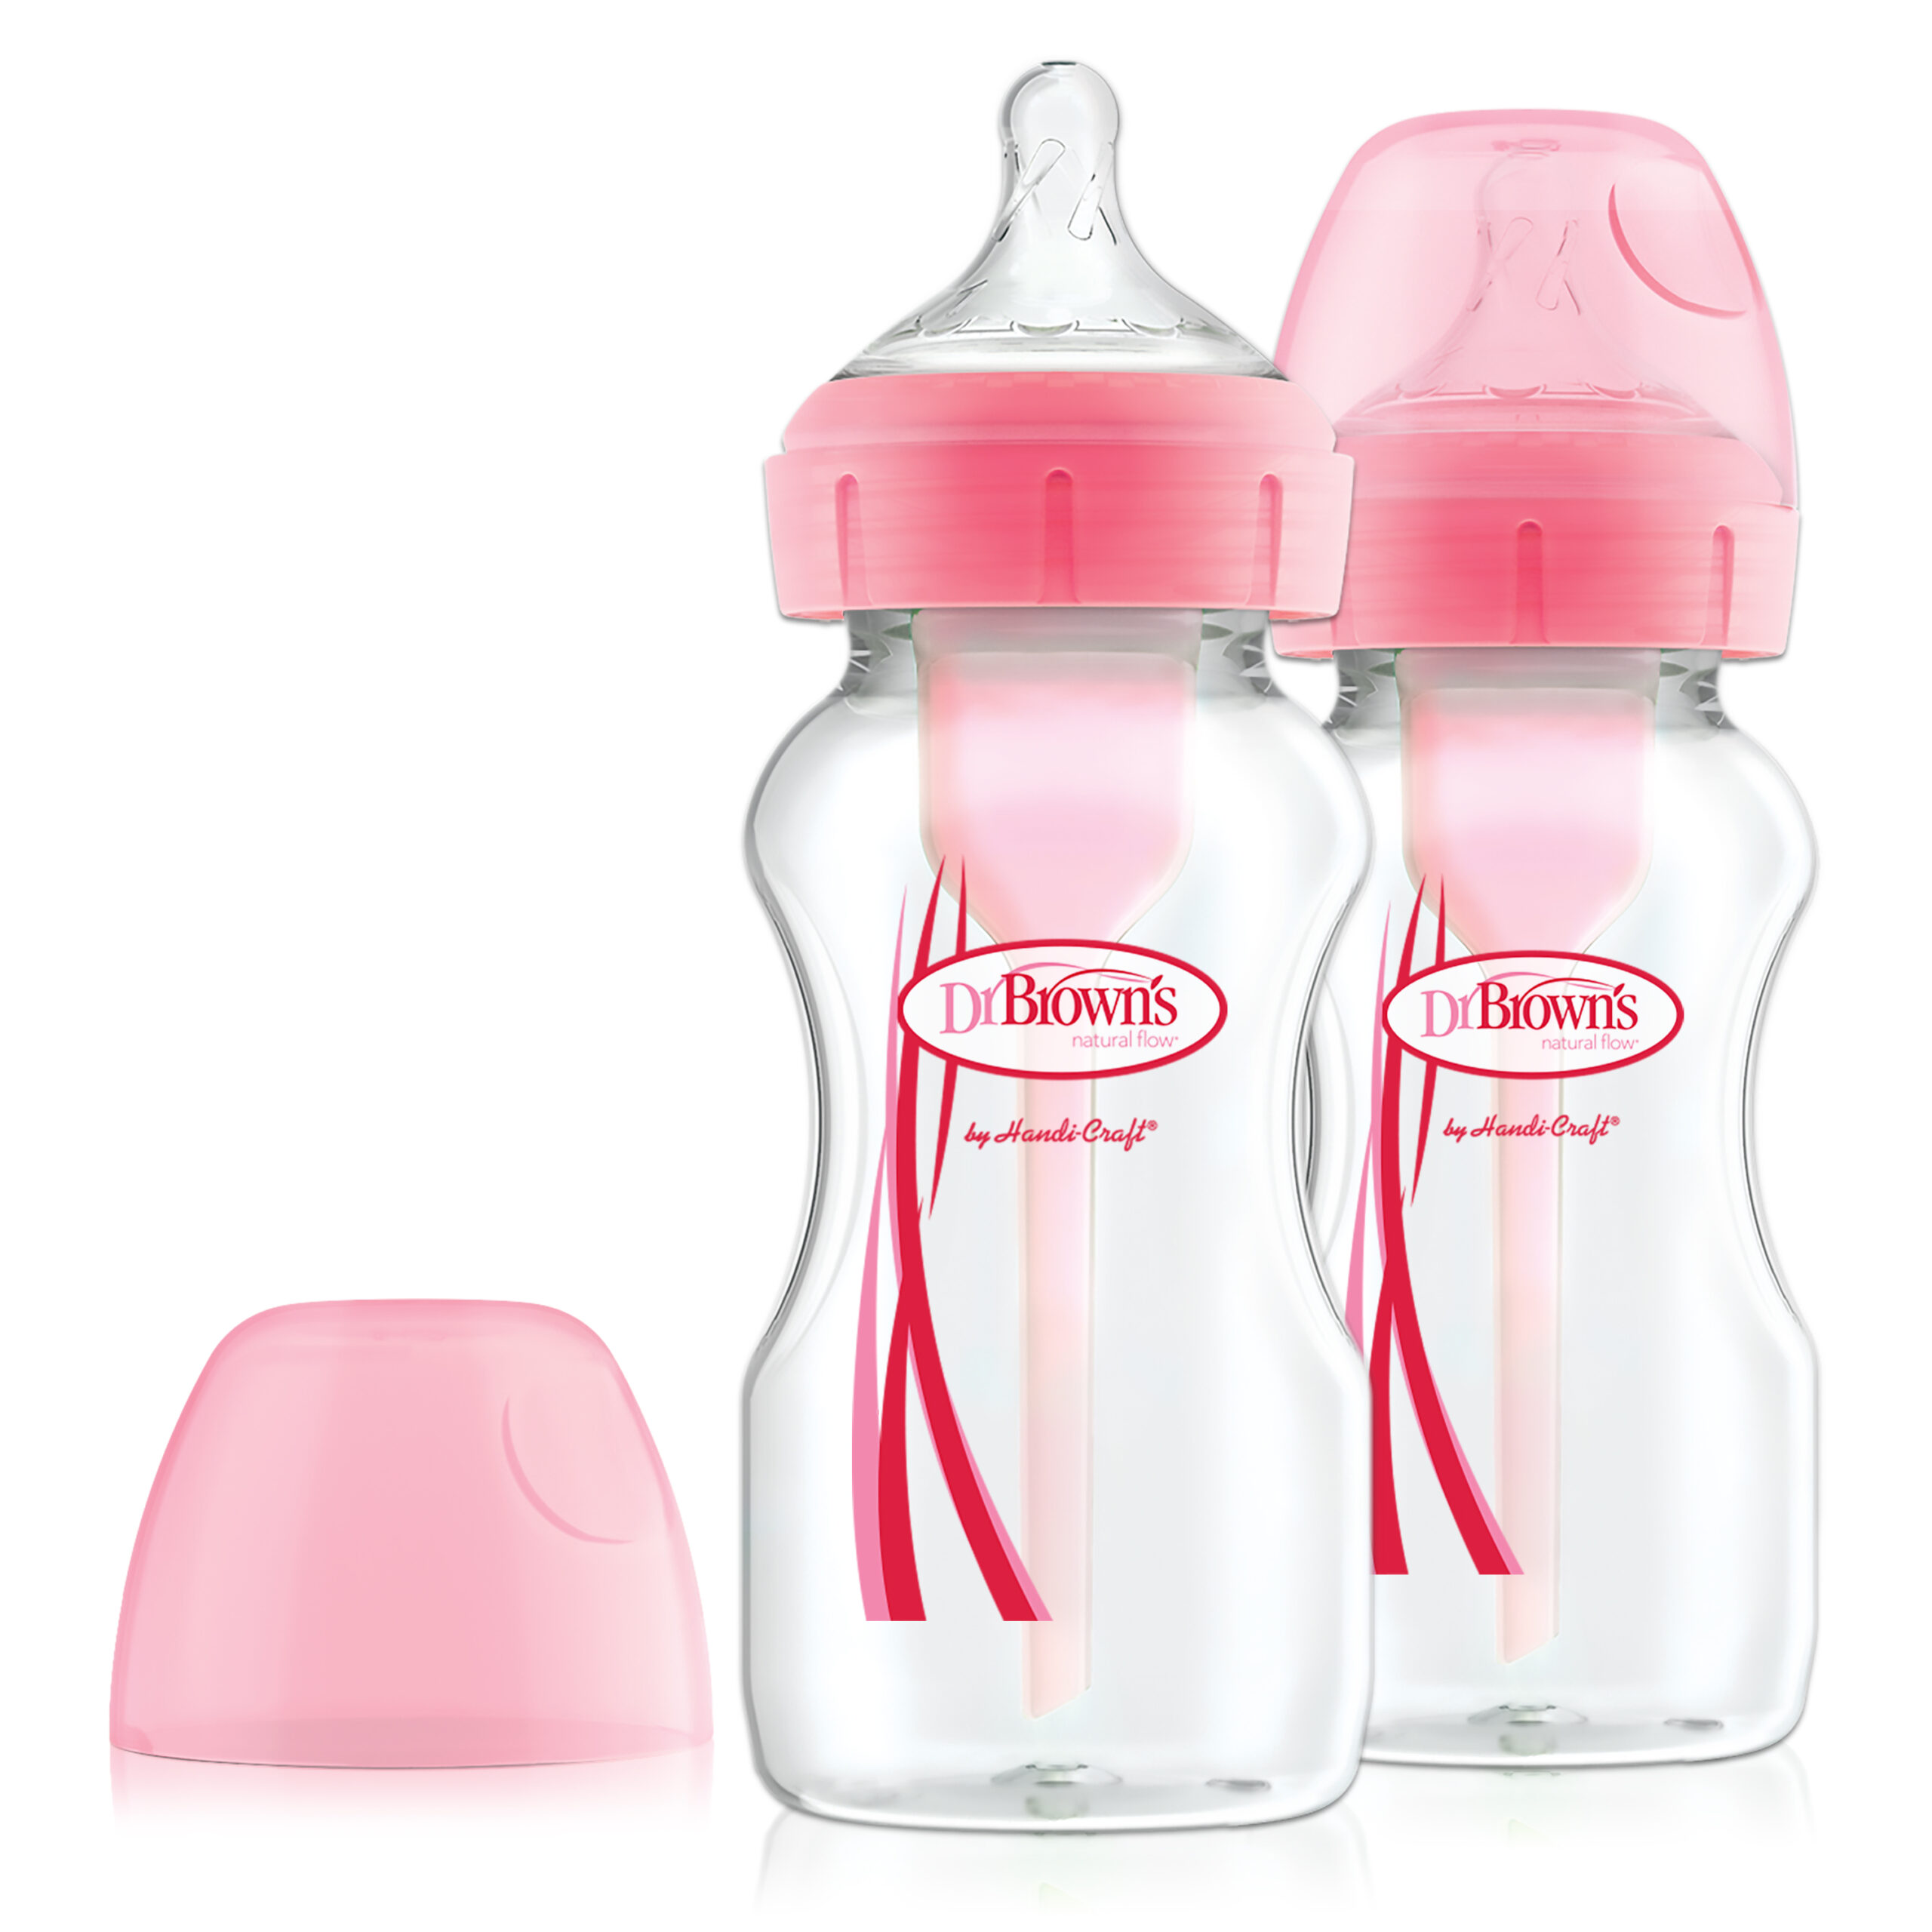 Brown's Options+ Anti-colic Bottle 2-pack | halsfles roze 270 ml • Dr. Brown's